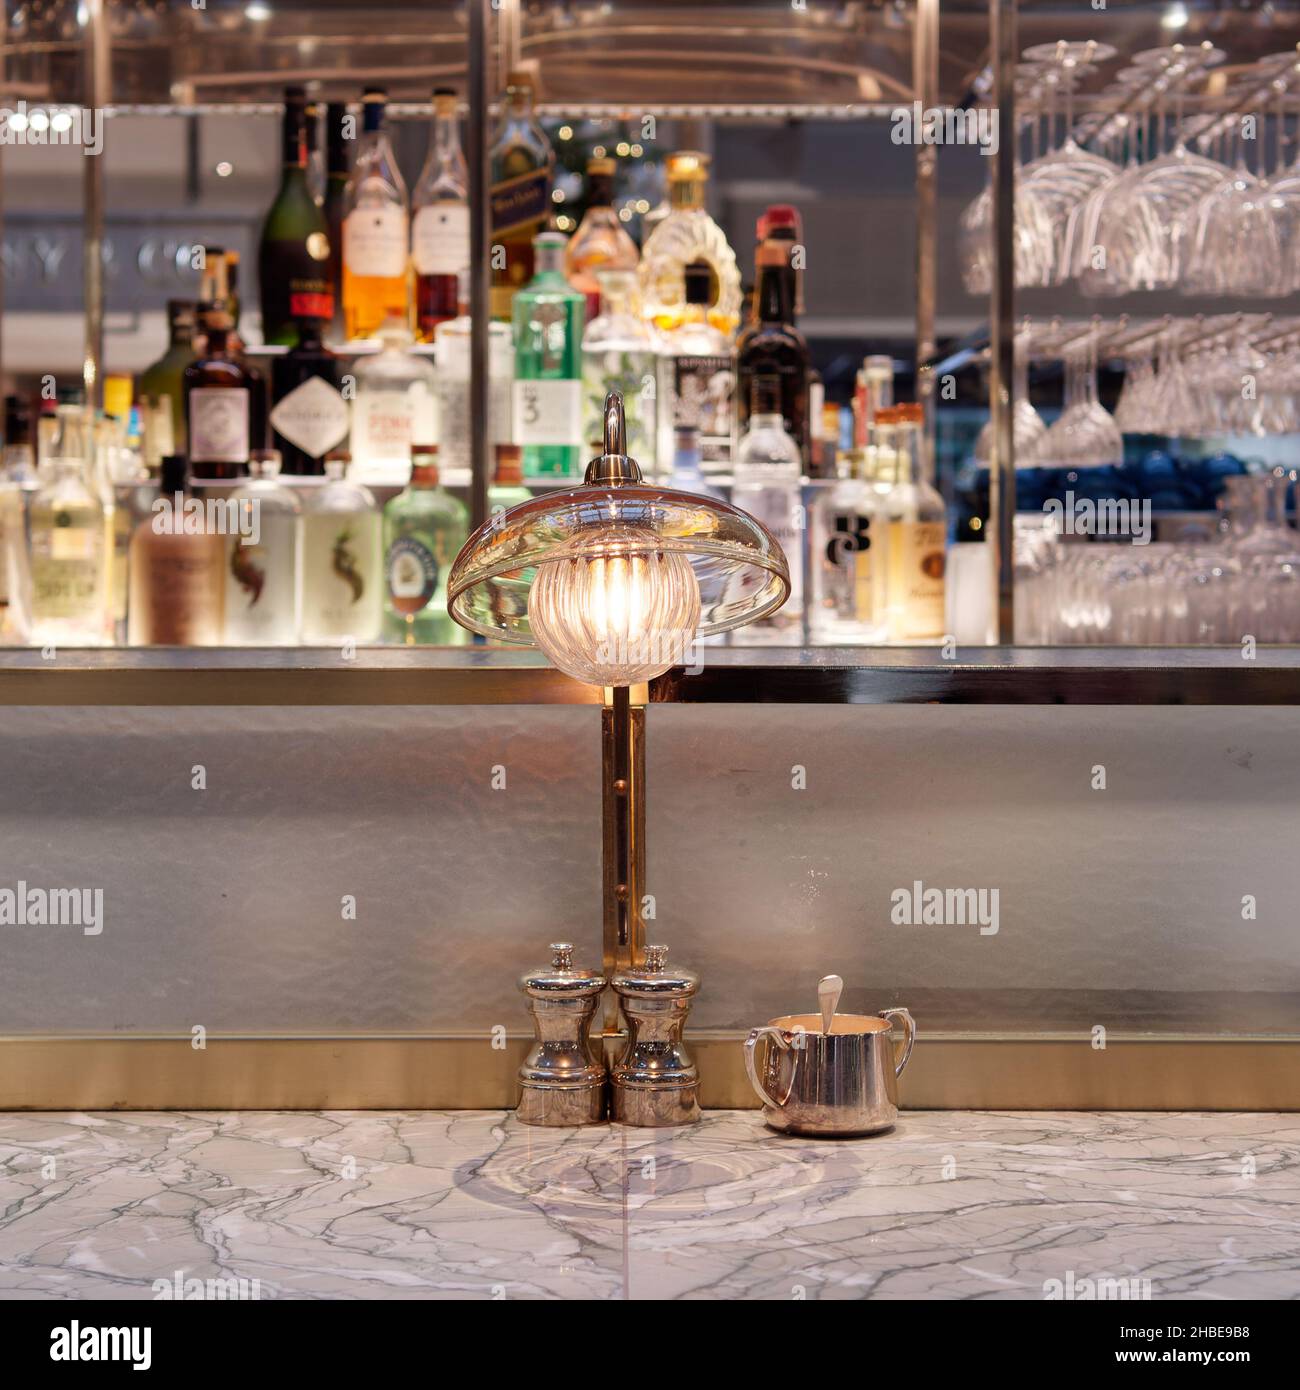 Close up of a lamp on the bar at Fortnum and Mason bar and restaurant inside the Royal Exchange, London. Stock Photo